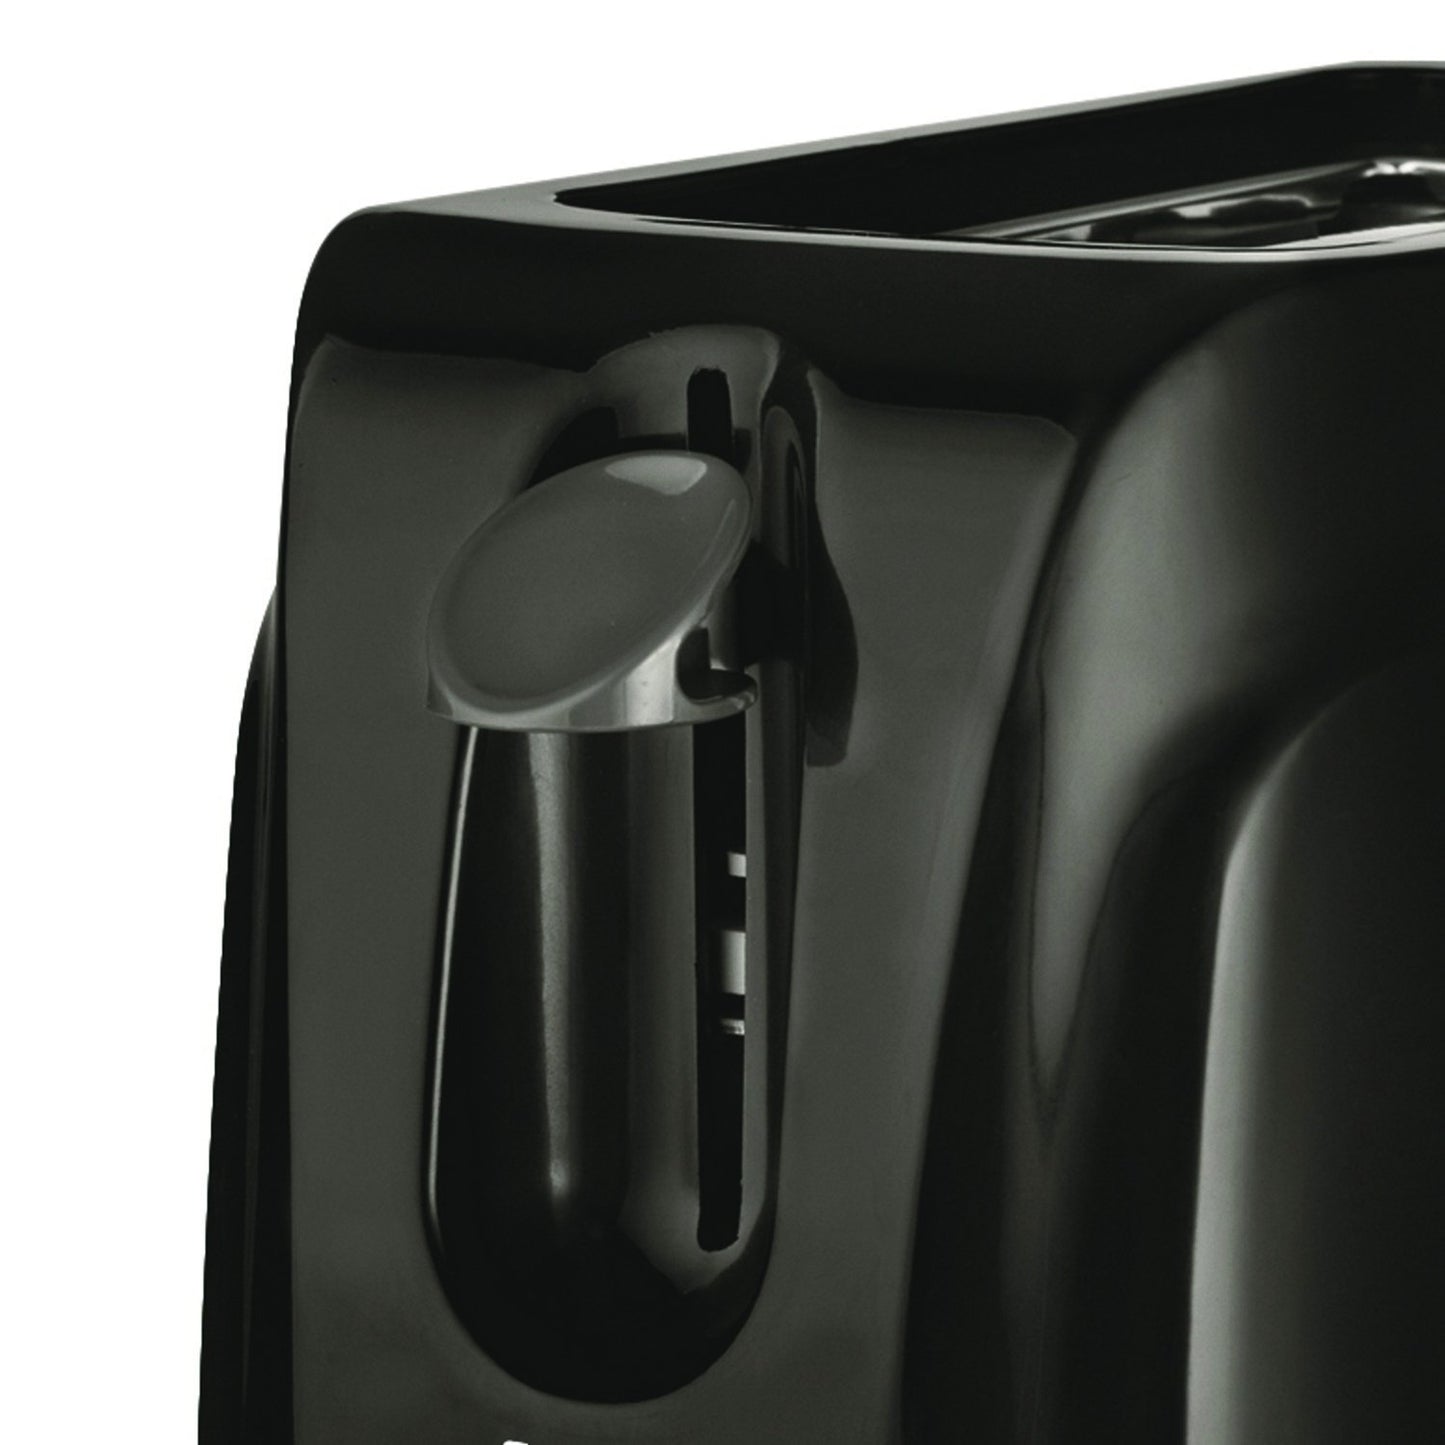 BRENTWOOD TS-260B Two Slice Toaster Black